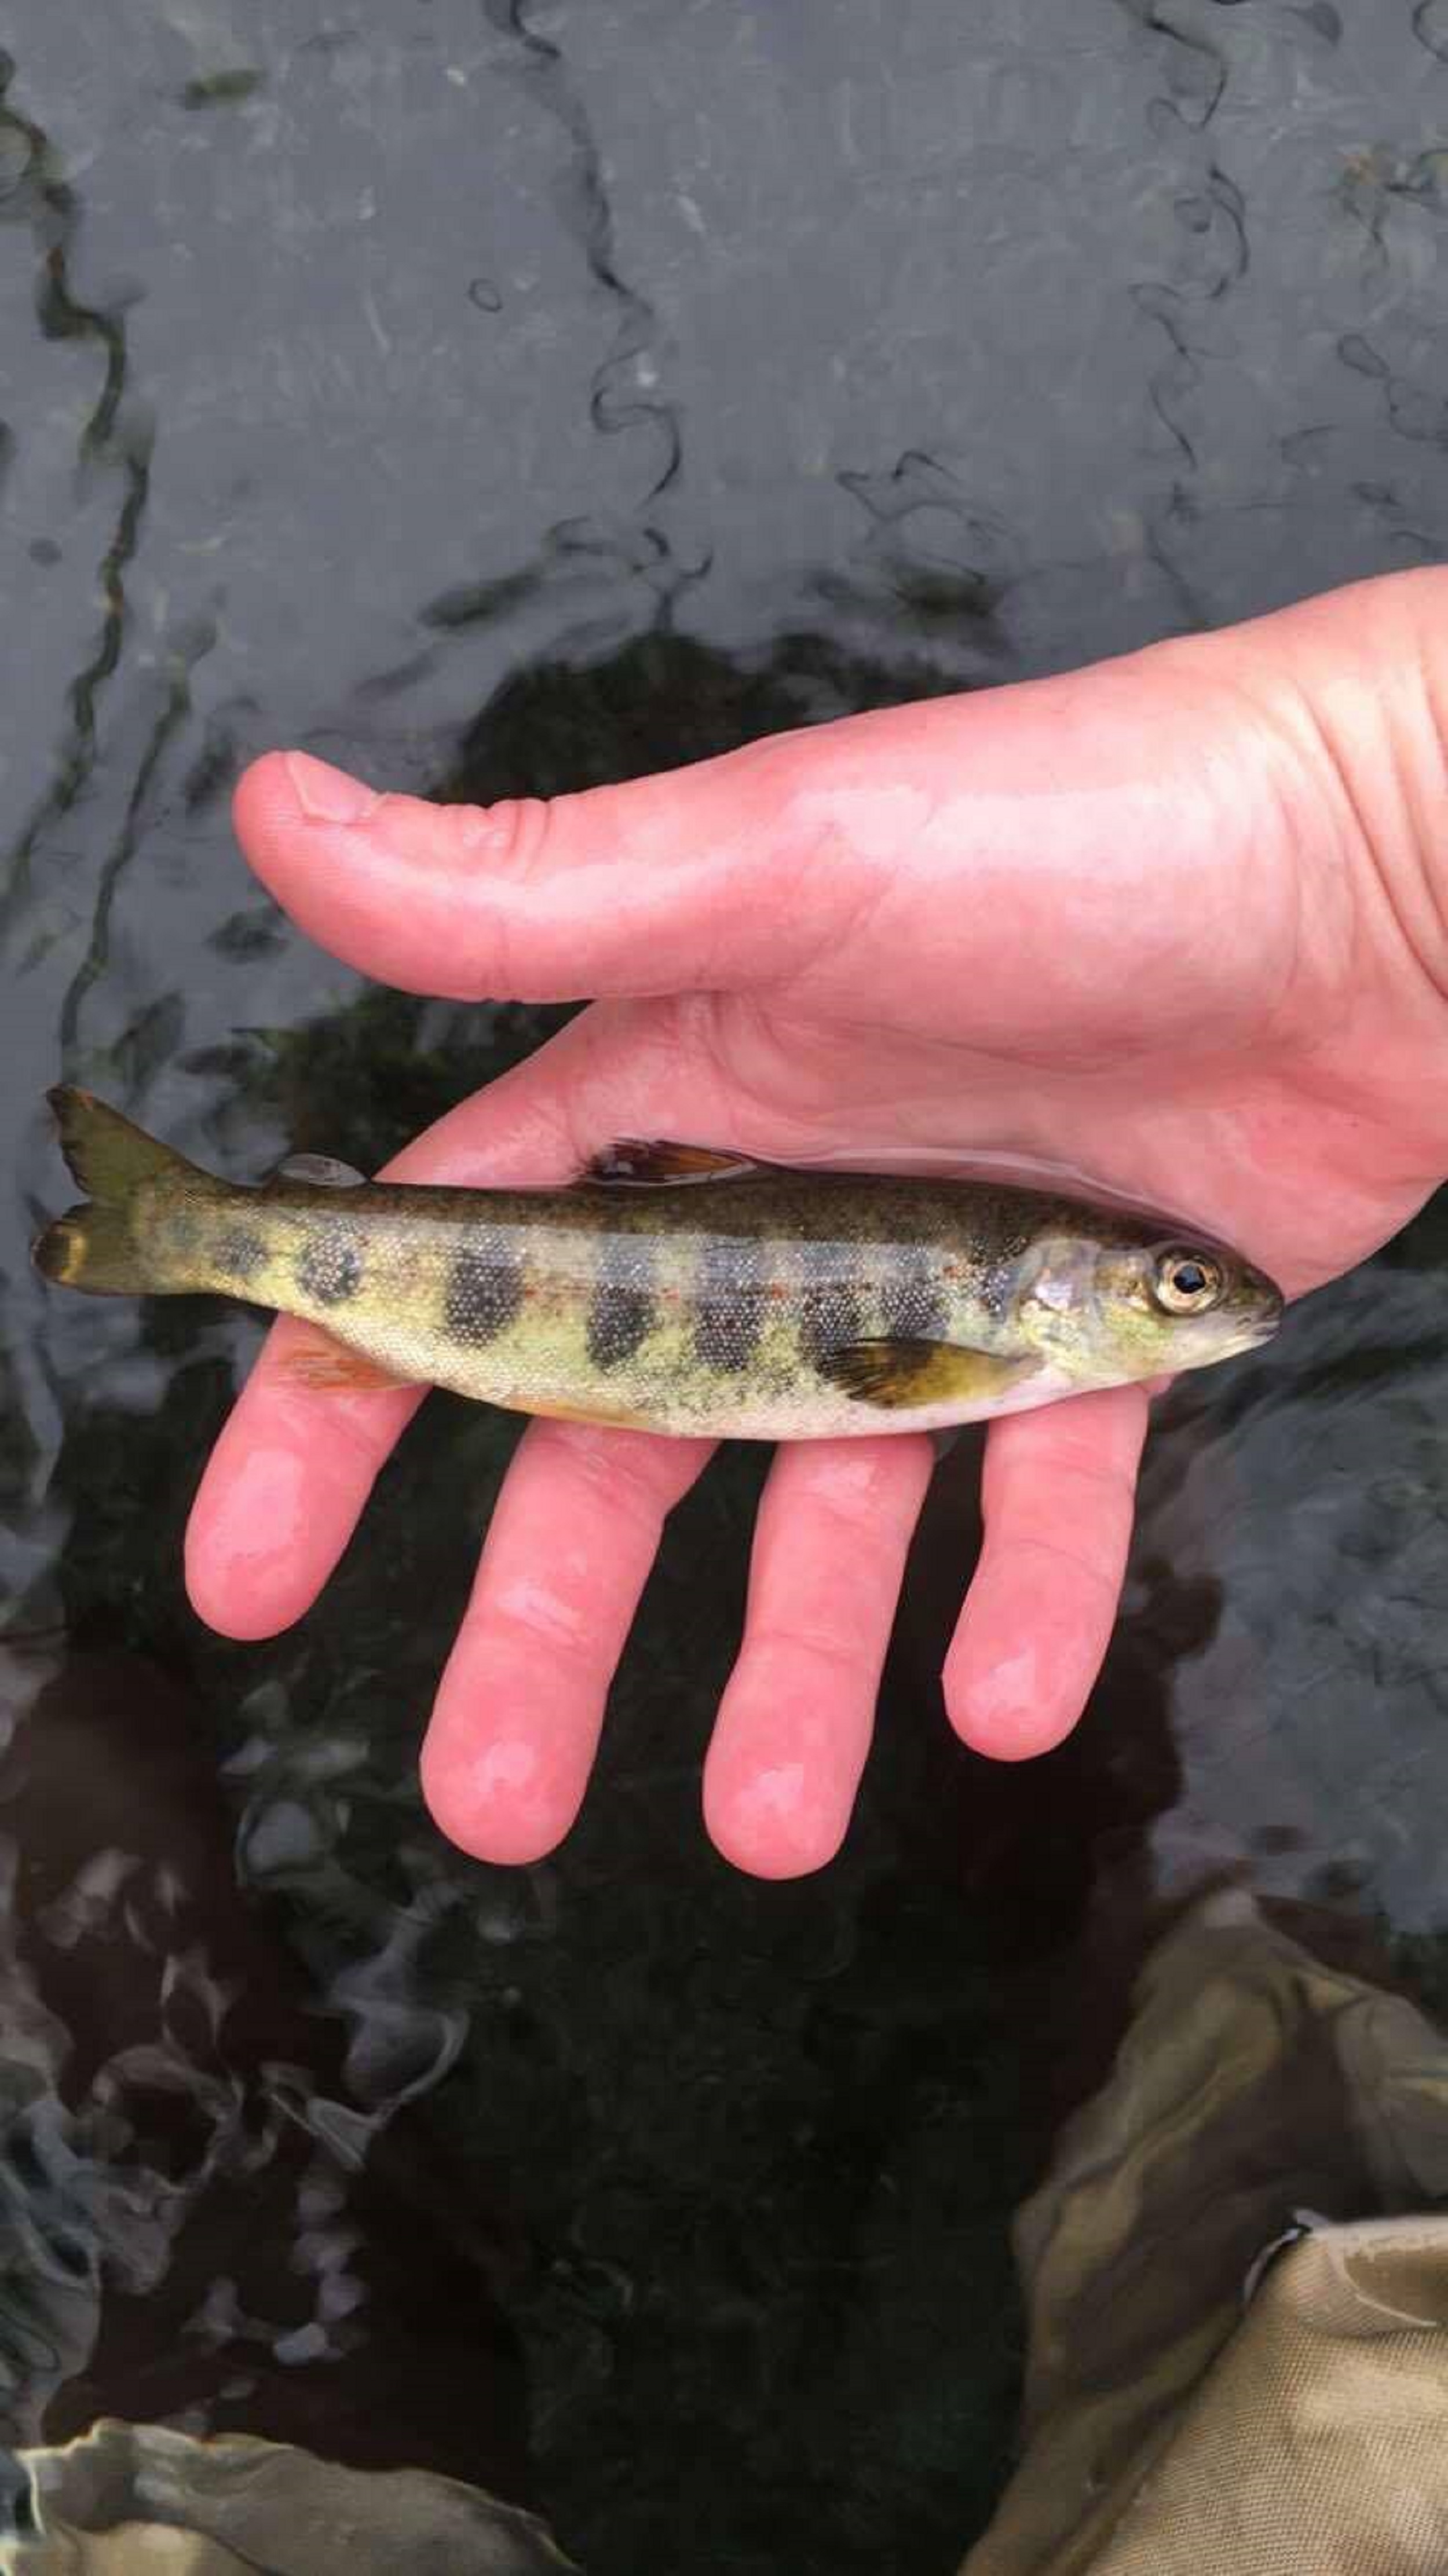 Biologist holding Atlantic salmon parr in their hand. The fish is approximately 5 inches long, with vertical dark banding marks.